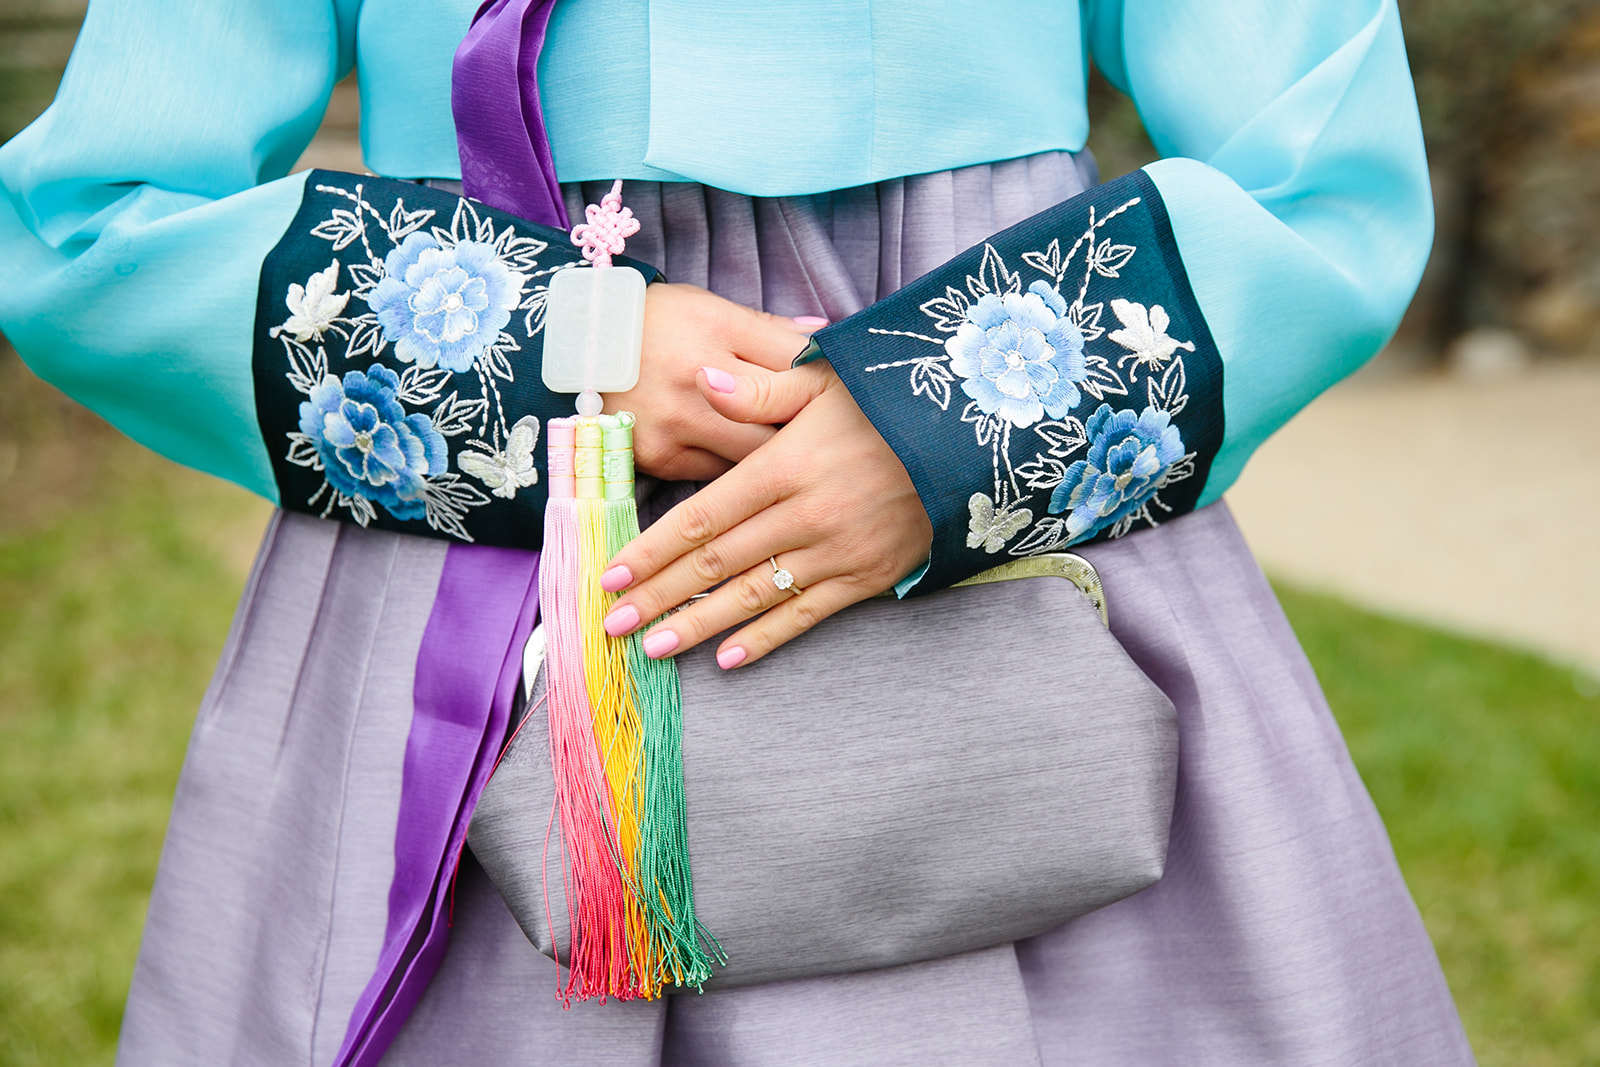 Korean Wedding Customs & Traditions: What You Should Know